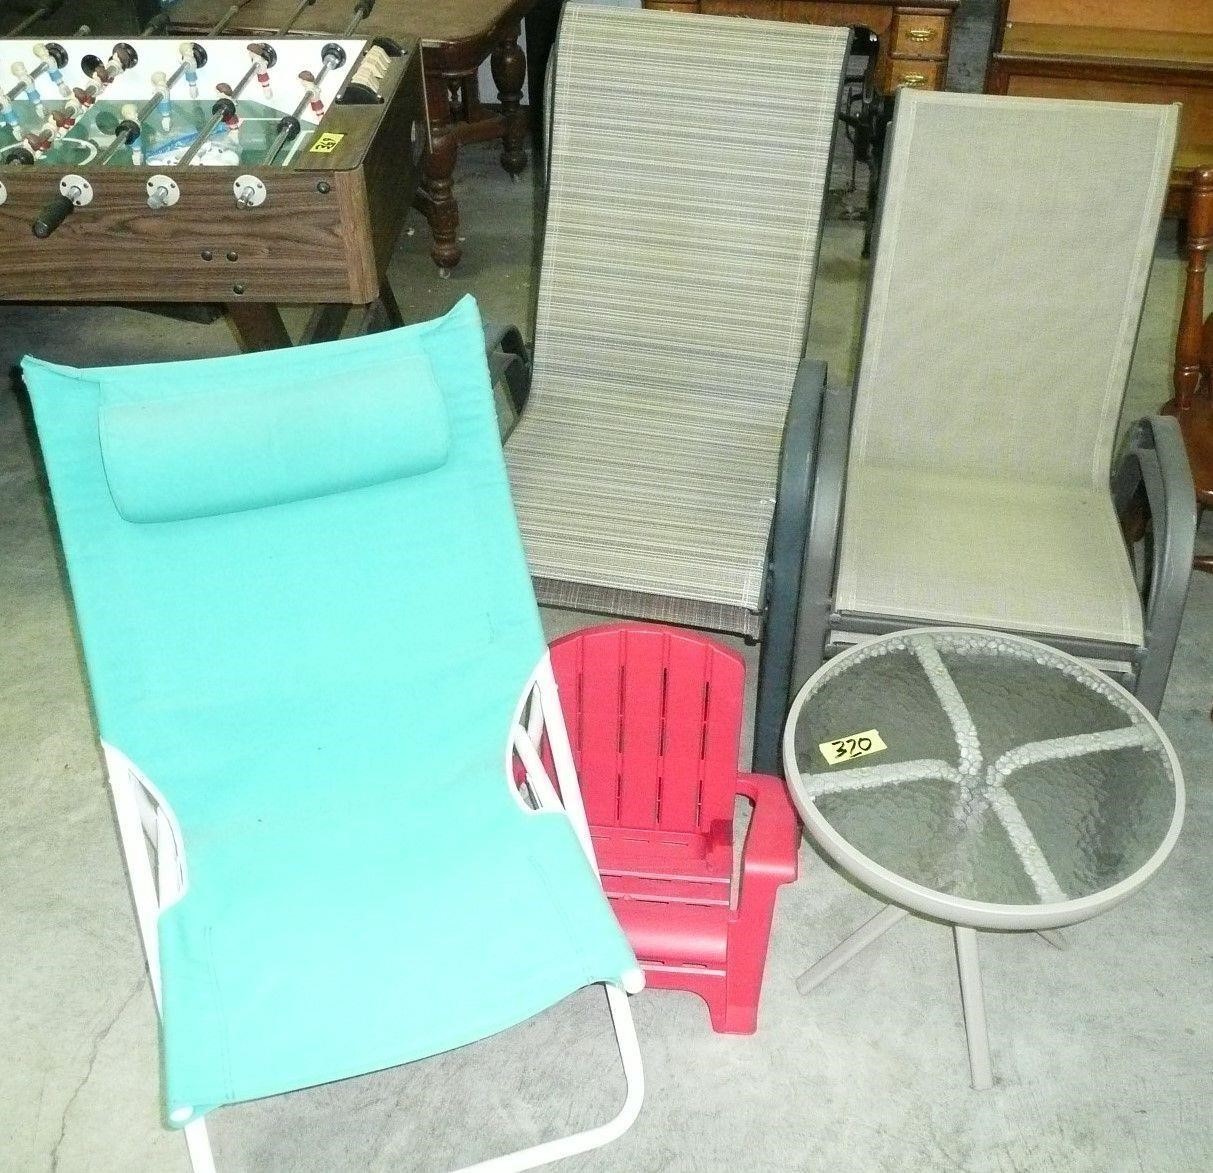 4 Strait Back Patio Chairs, Folding Chair, & more